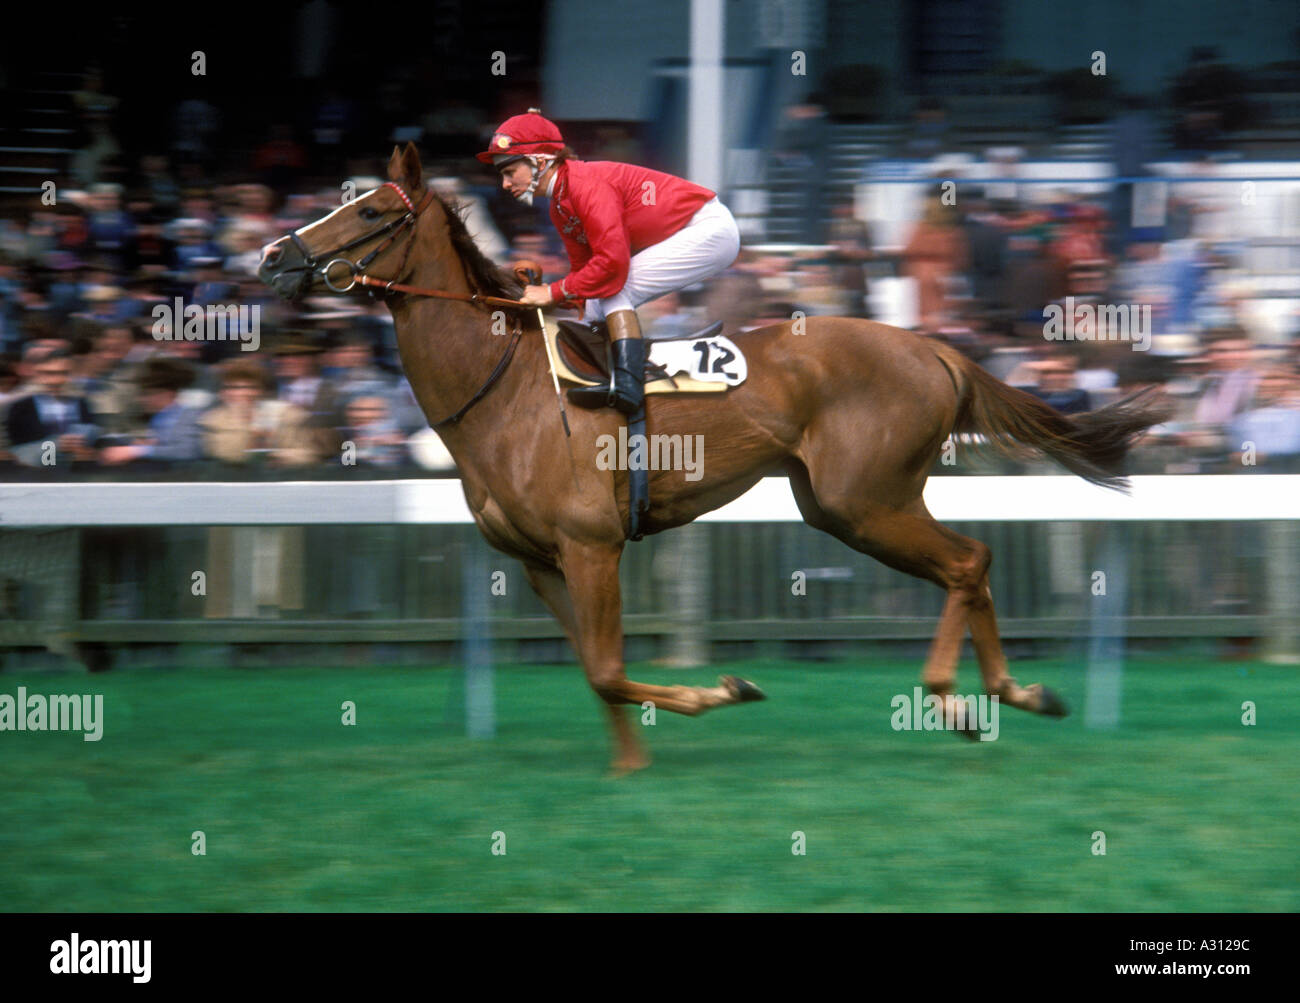 Vintage late 1970s Newmarket horseracing horse and jockey Willie Carson going to start  Stock Photo